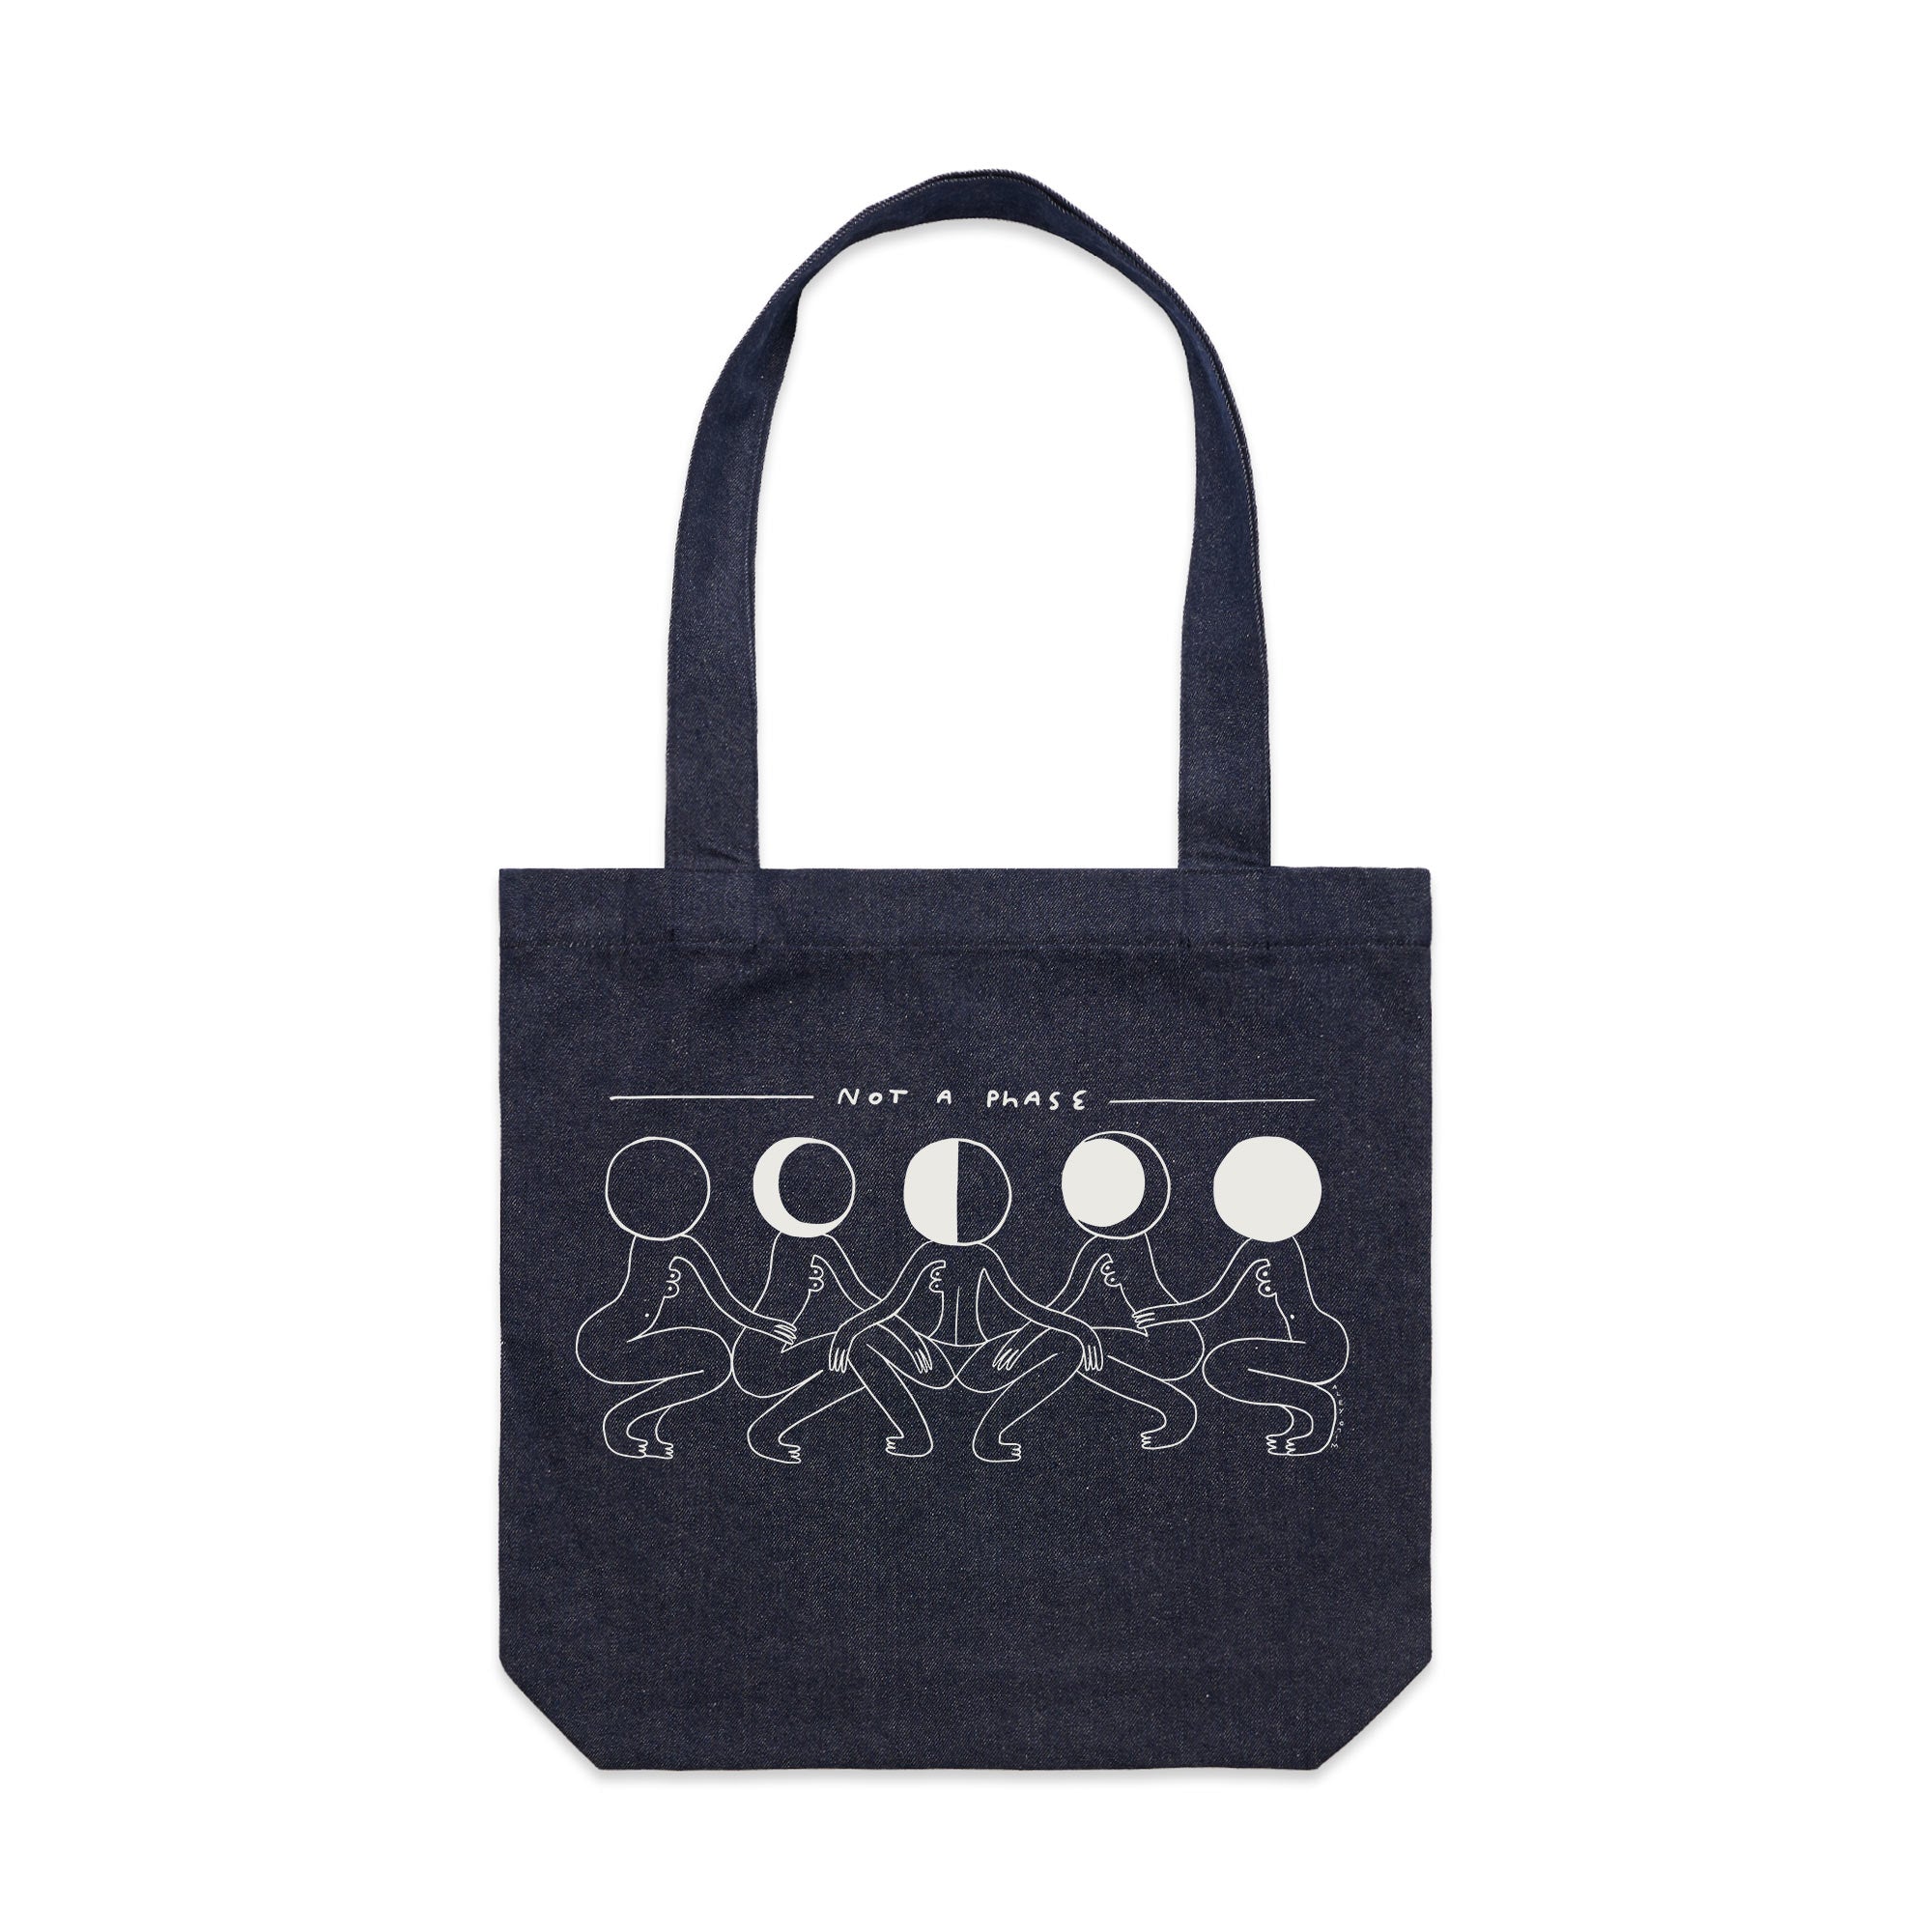 Not A Phase Tote